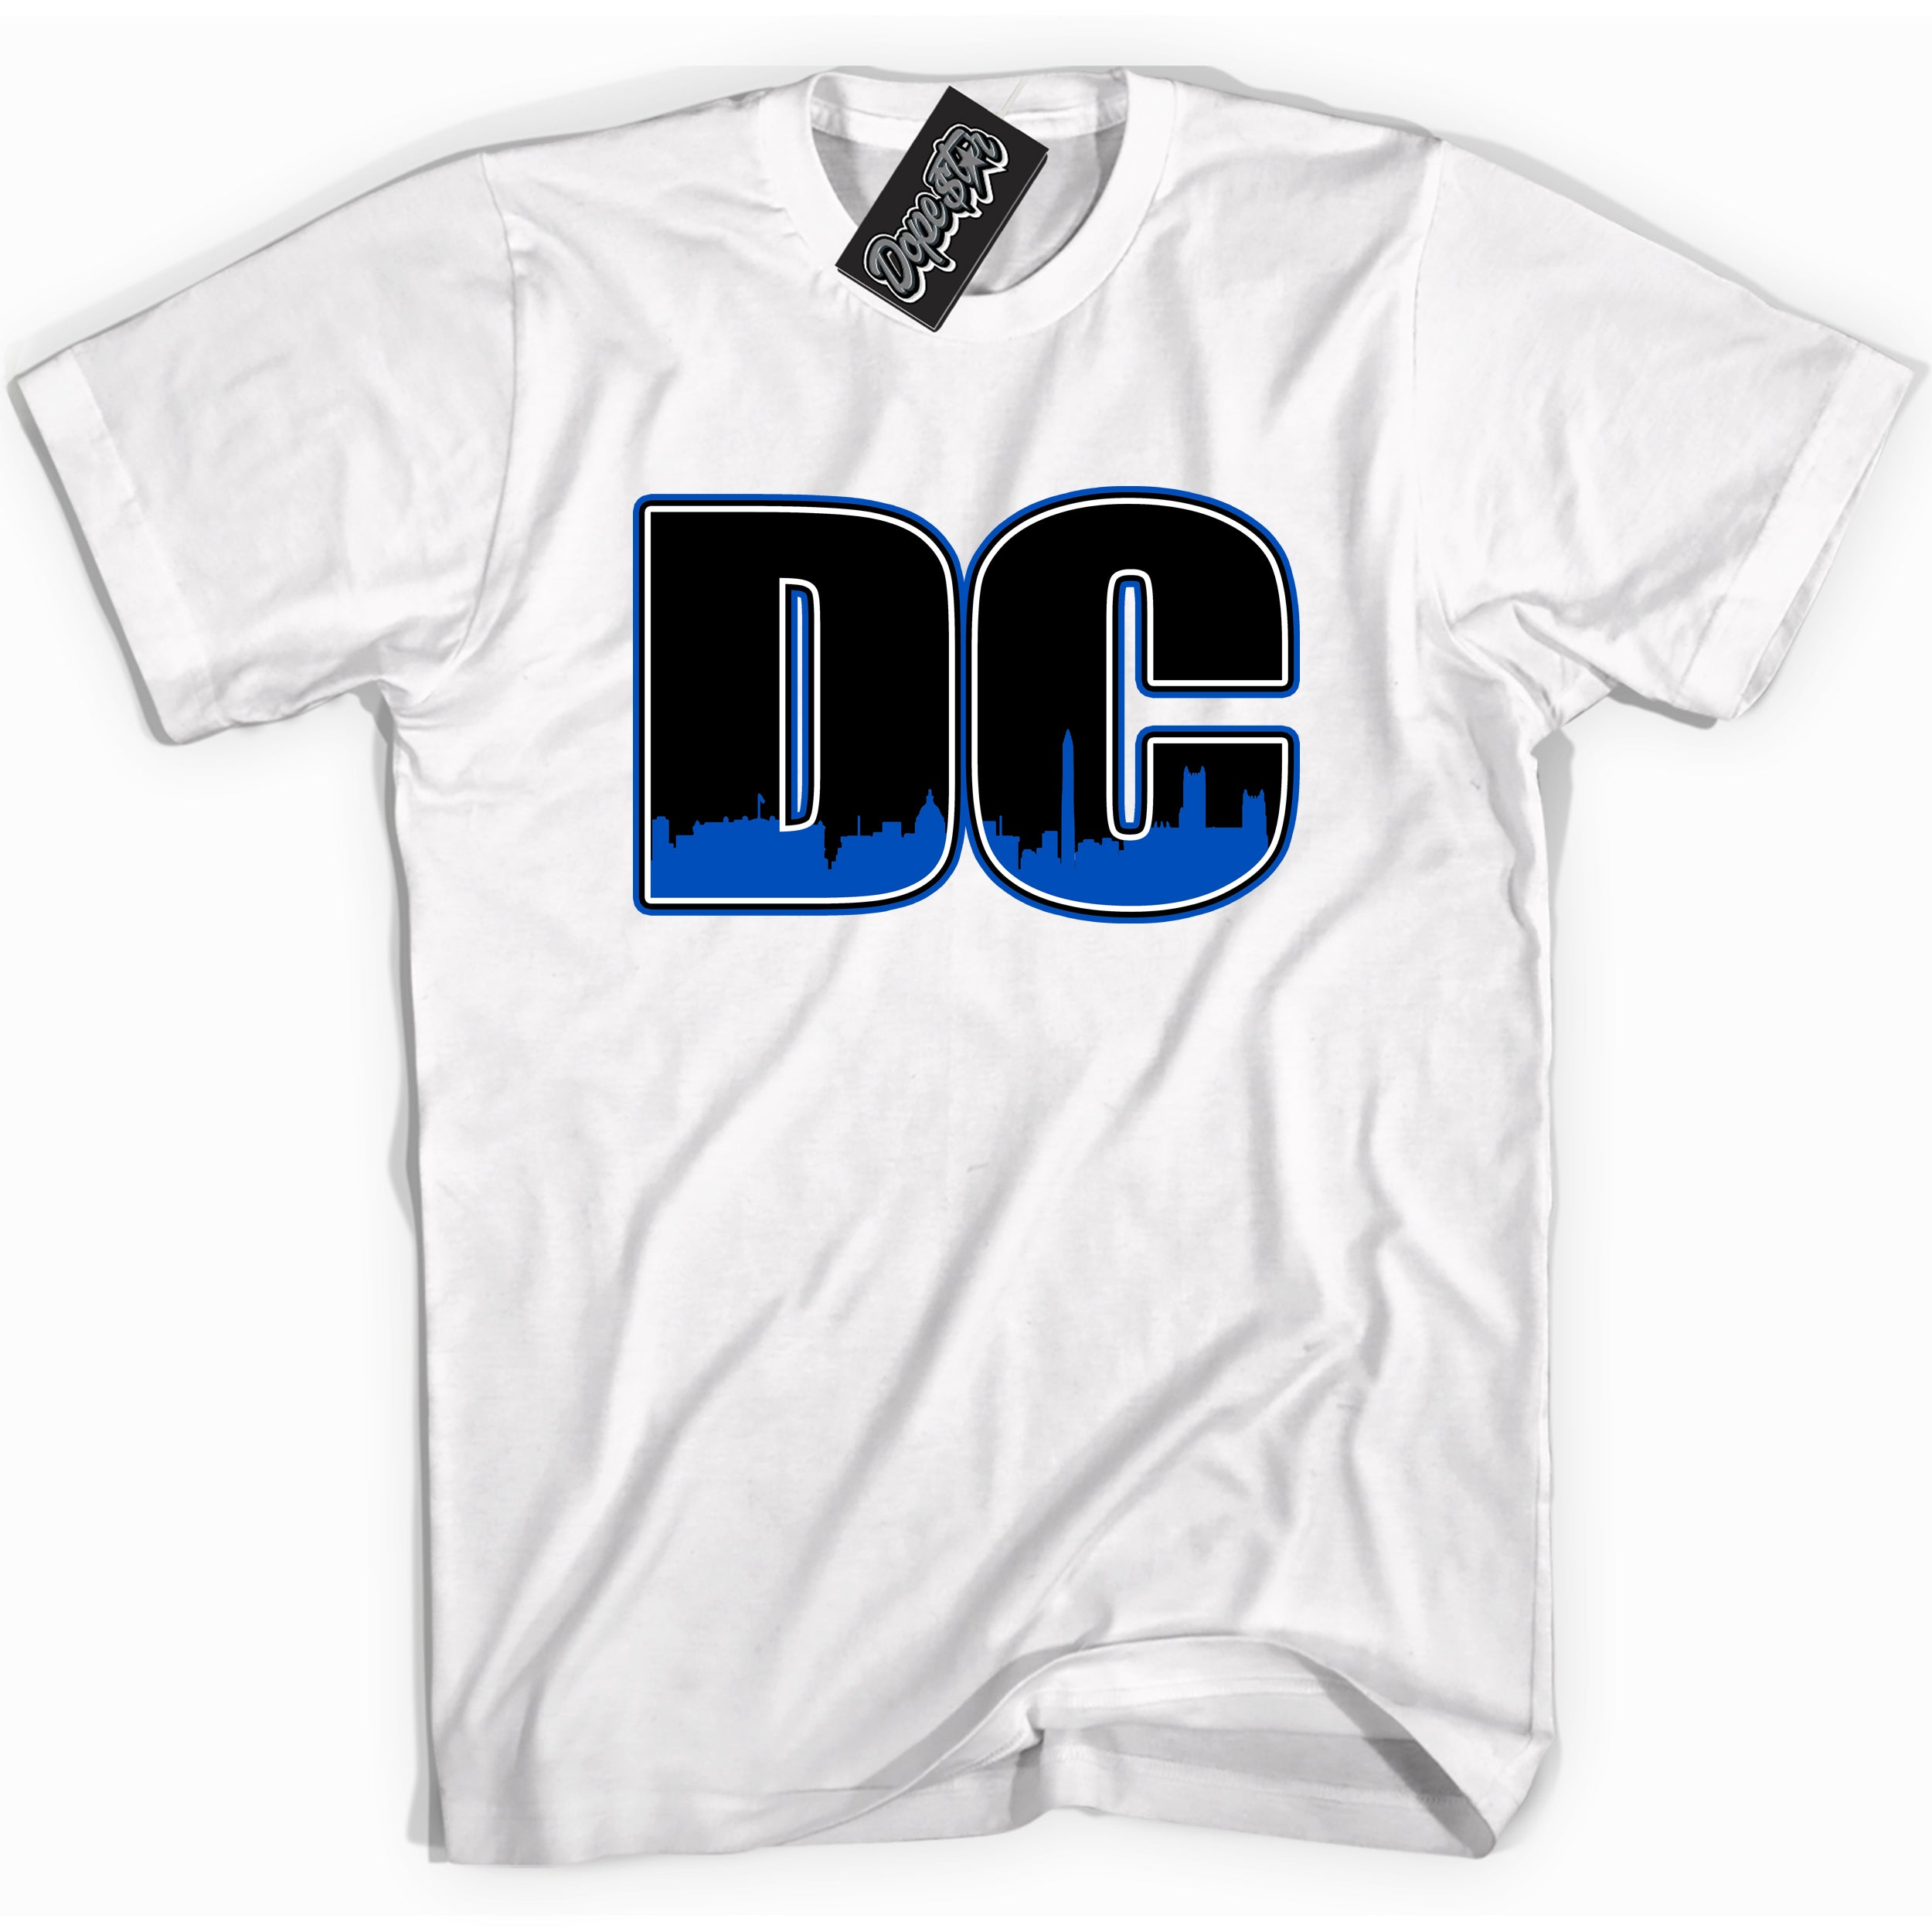 Cool White graphic tee with DC print, that perfectly matches OG Royal Reimagined 1s sneakers 